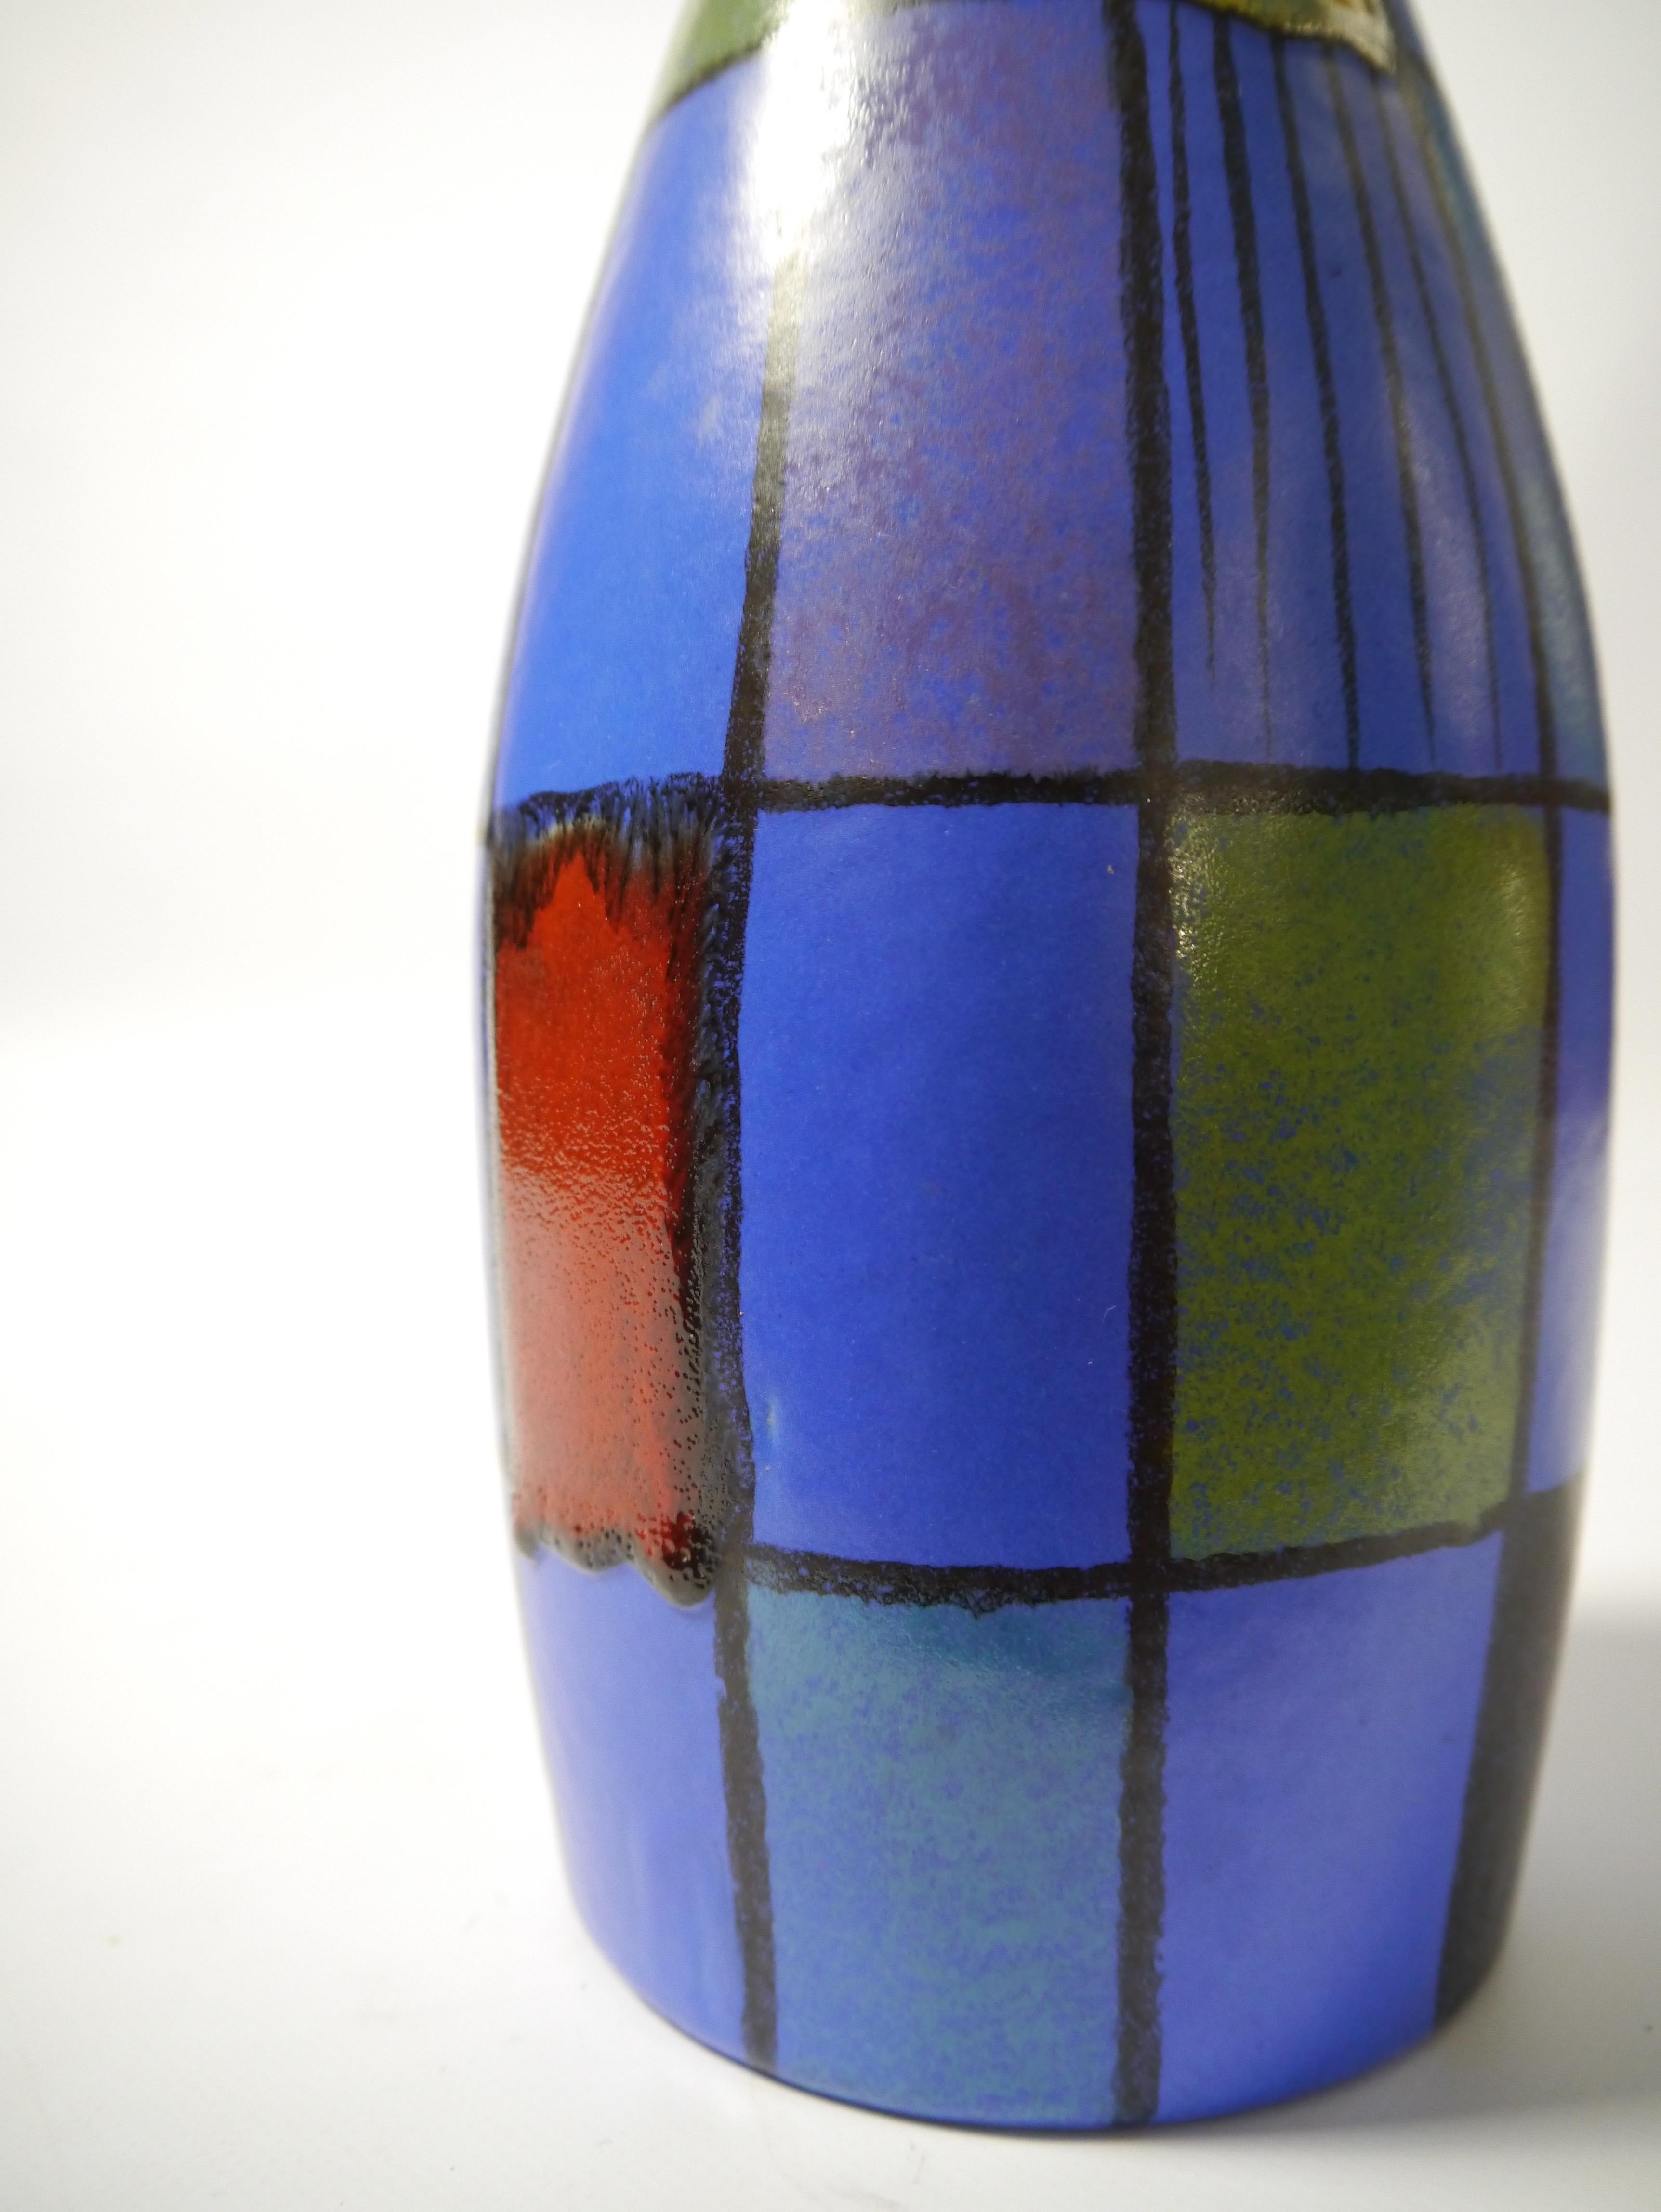 Glazed Large West Germany Pottery Vase by Bodo Mans for BAY Keramik, W-G, 1960s For Sale